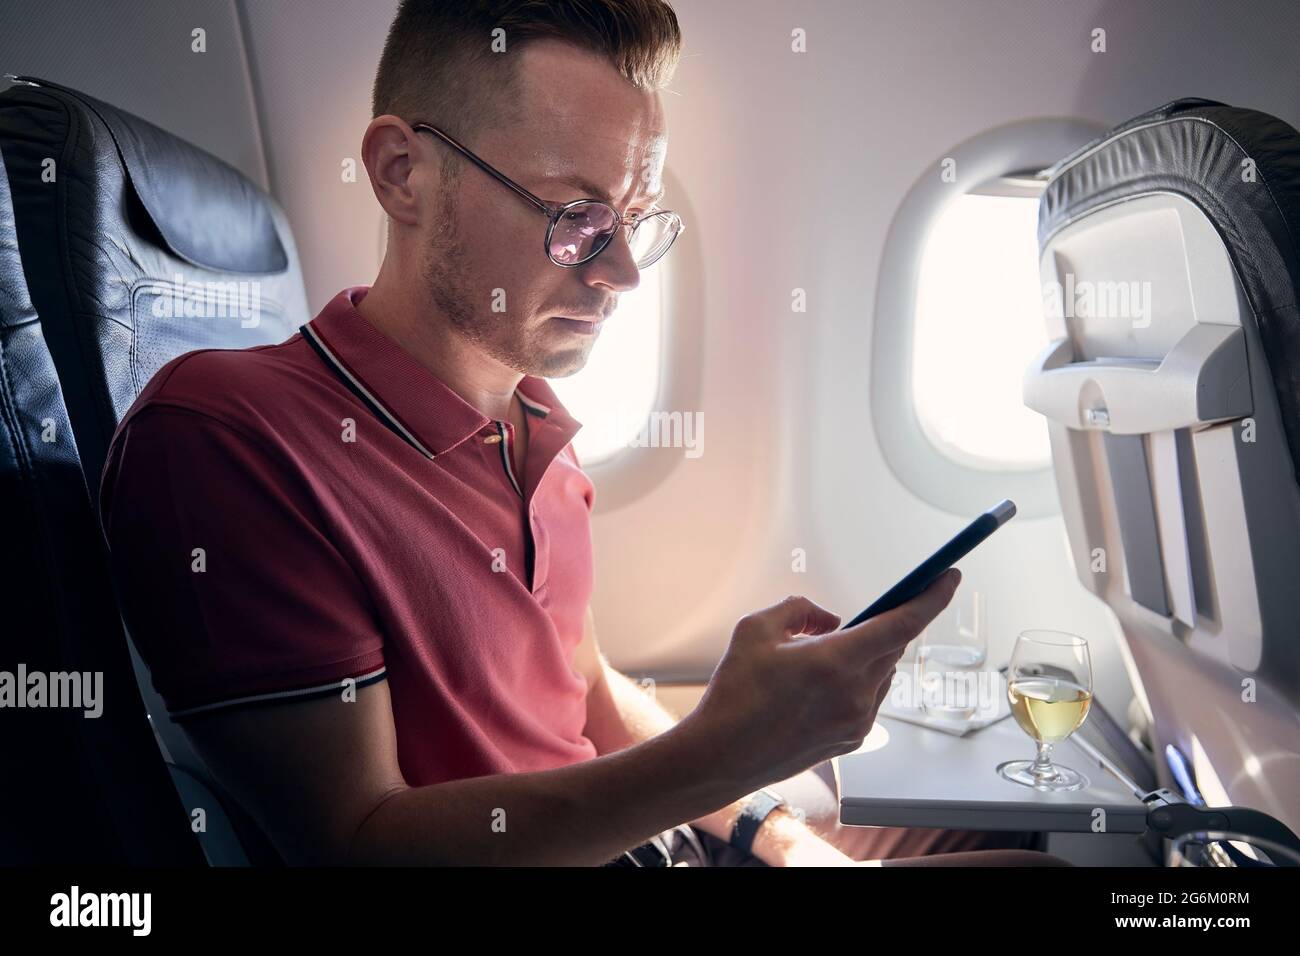 Young man using mobile phone at airplane. Passenger enjoys flight with internet connection a beverages. Stock Photo